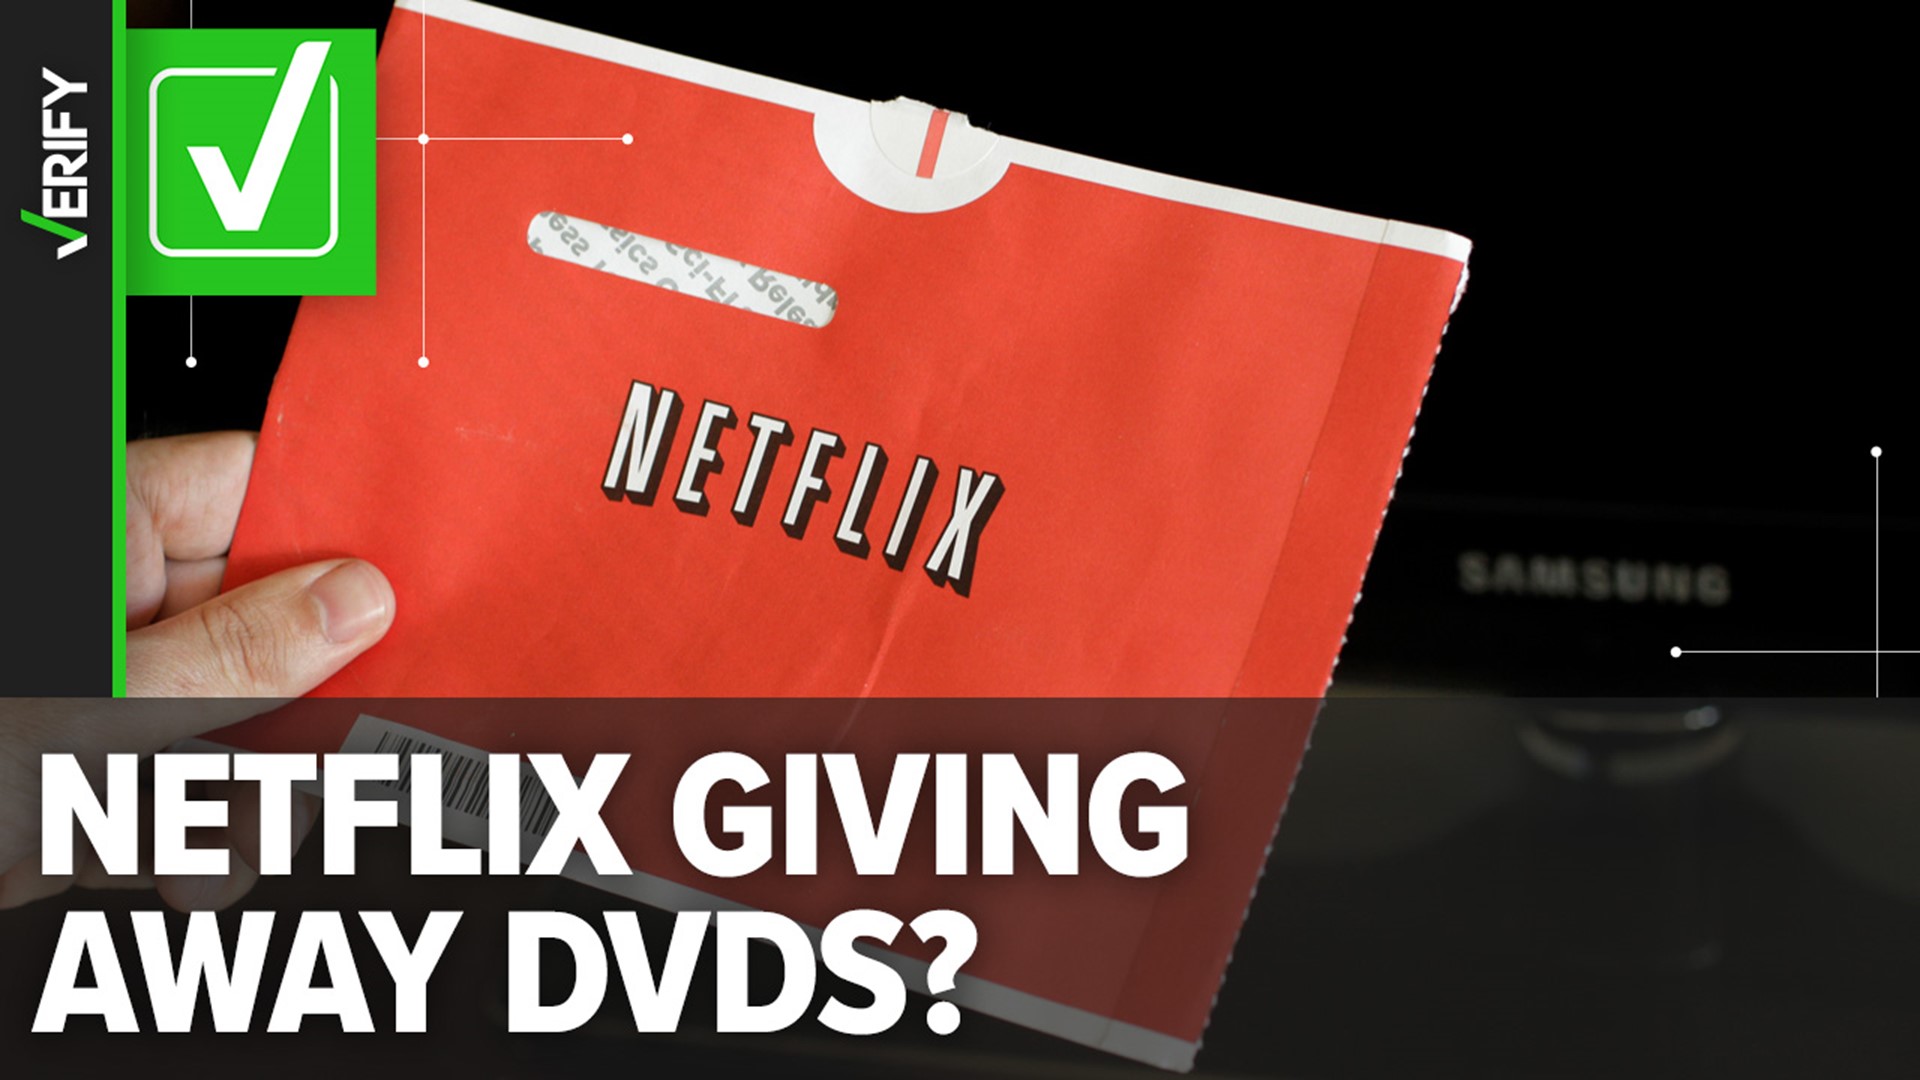 Netflix will ship out its final red envelopes by the end of September. Customers can keep any DVDs they still have by then and some could receive surprise discs.